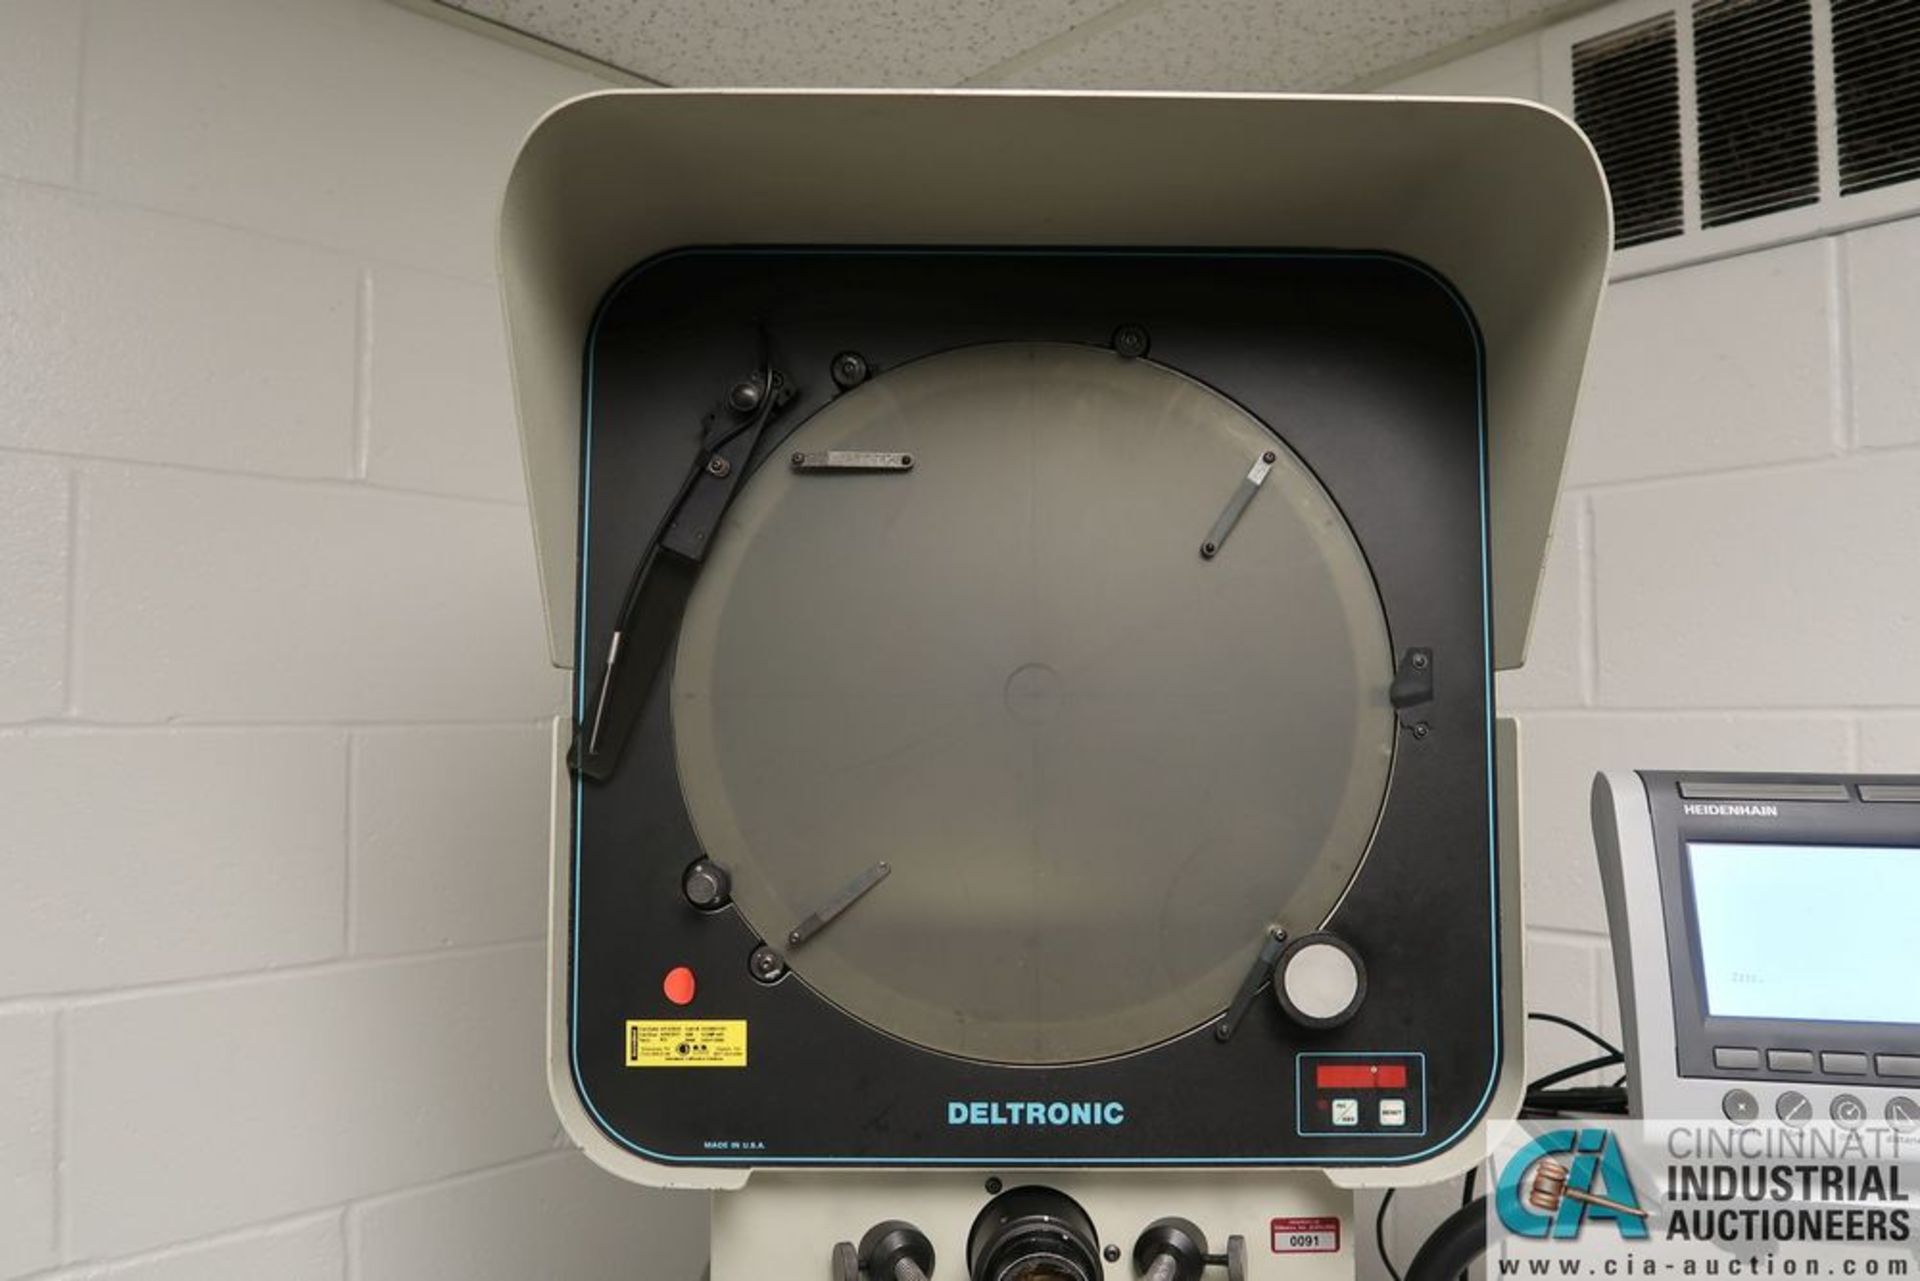 14" DELTRONIC DH214 OPTICAL COMPARATOR; S/N 249113880, **Rigging Fee Due $100.00** - Image 7 of 8